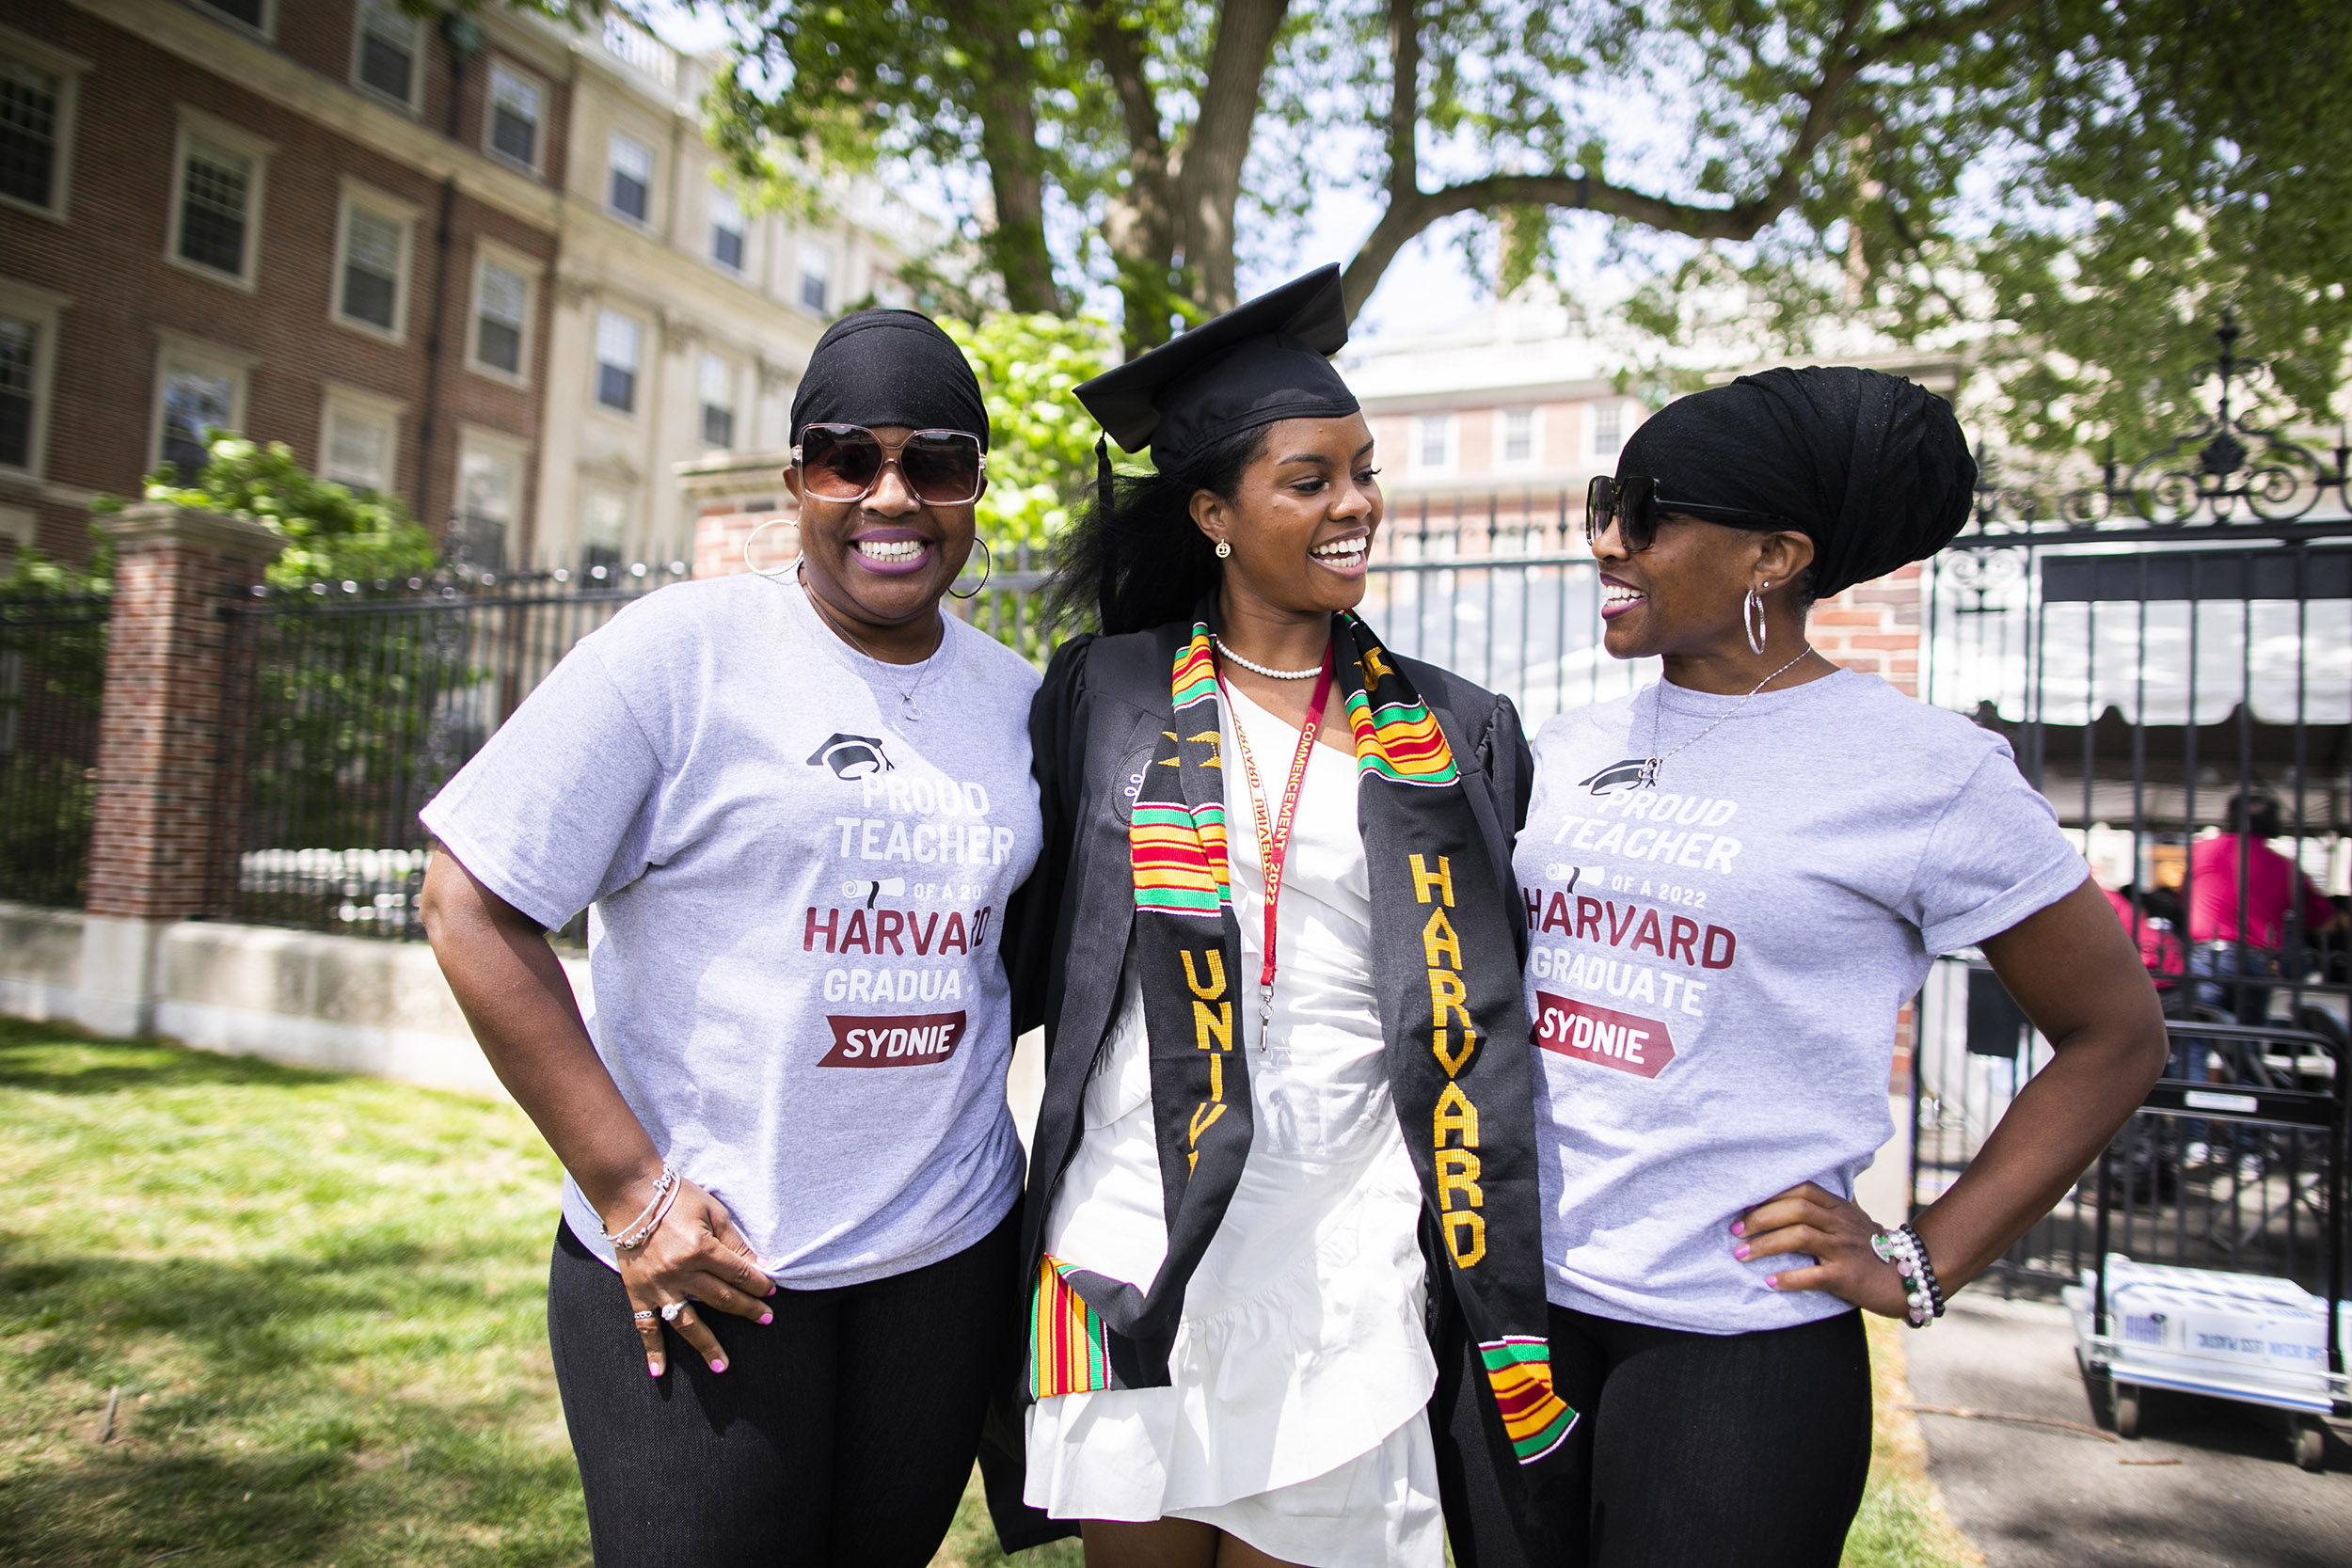 Sydnie Cobb in cap and gown flanked by twins Aprile and Deanna Thomas, who were wearing matching T-shirts that read "Proud Teacher of a 2022 Harvard Graduate."